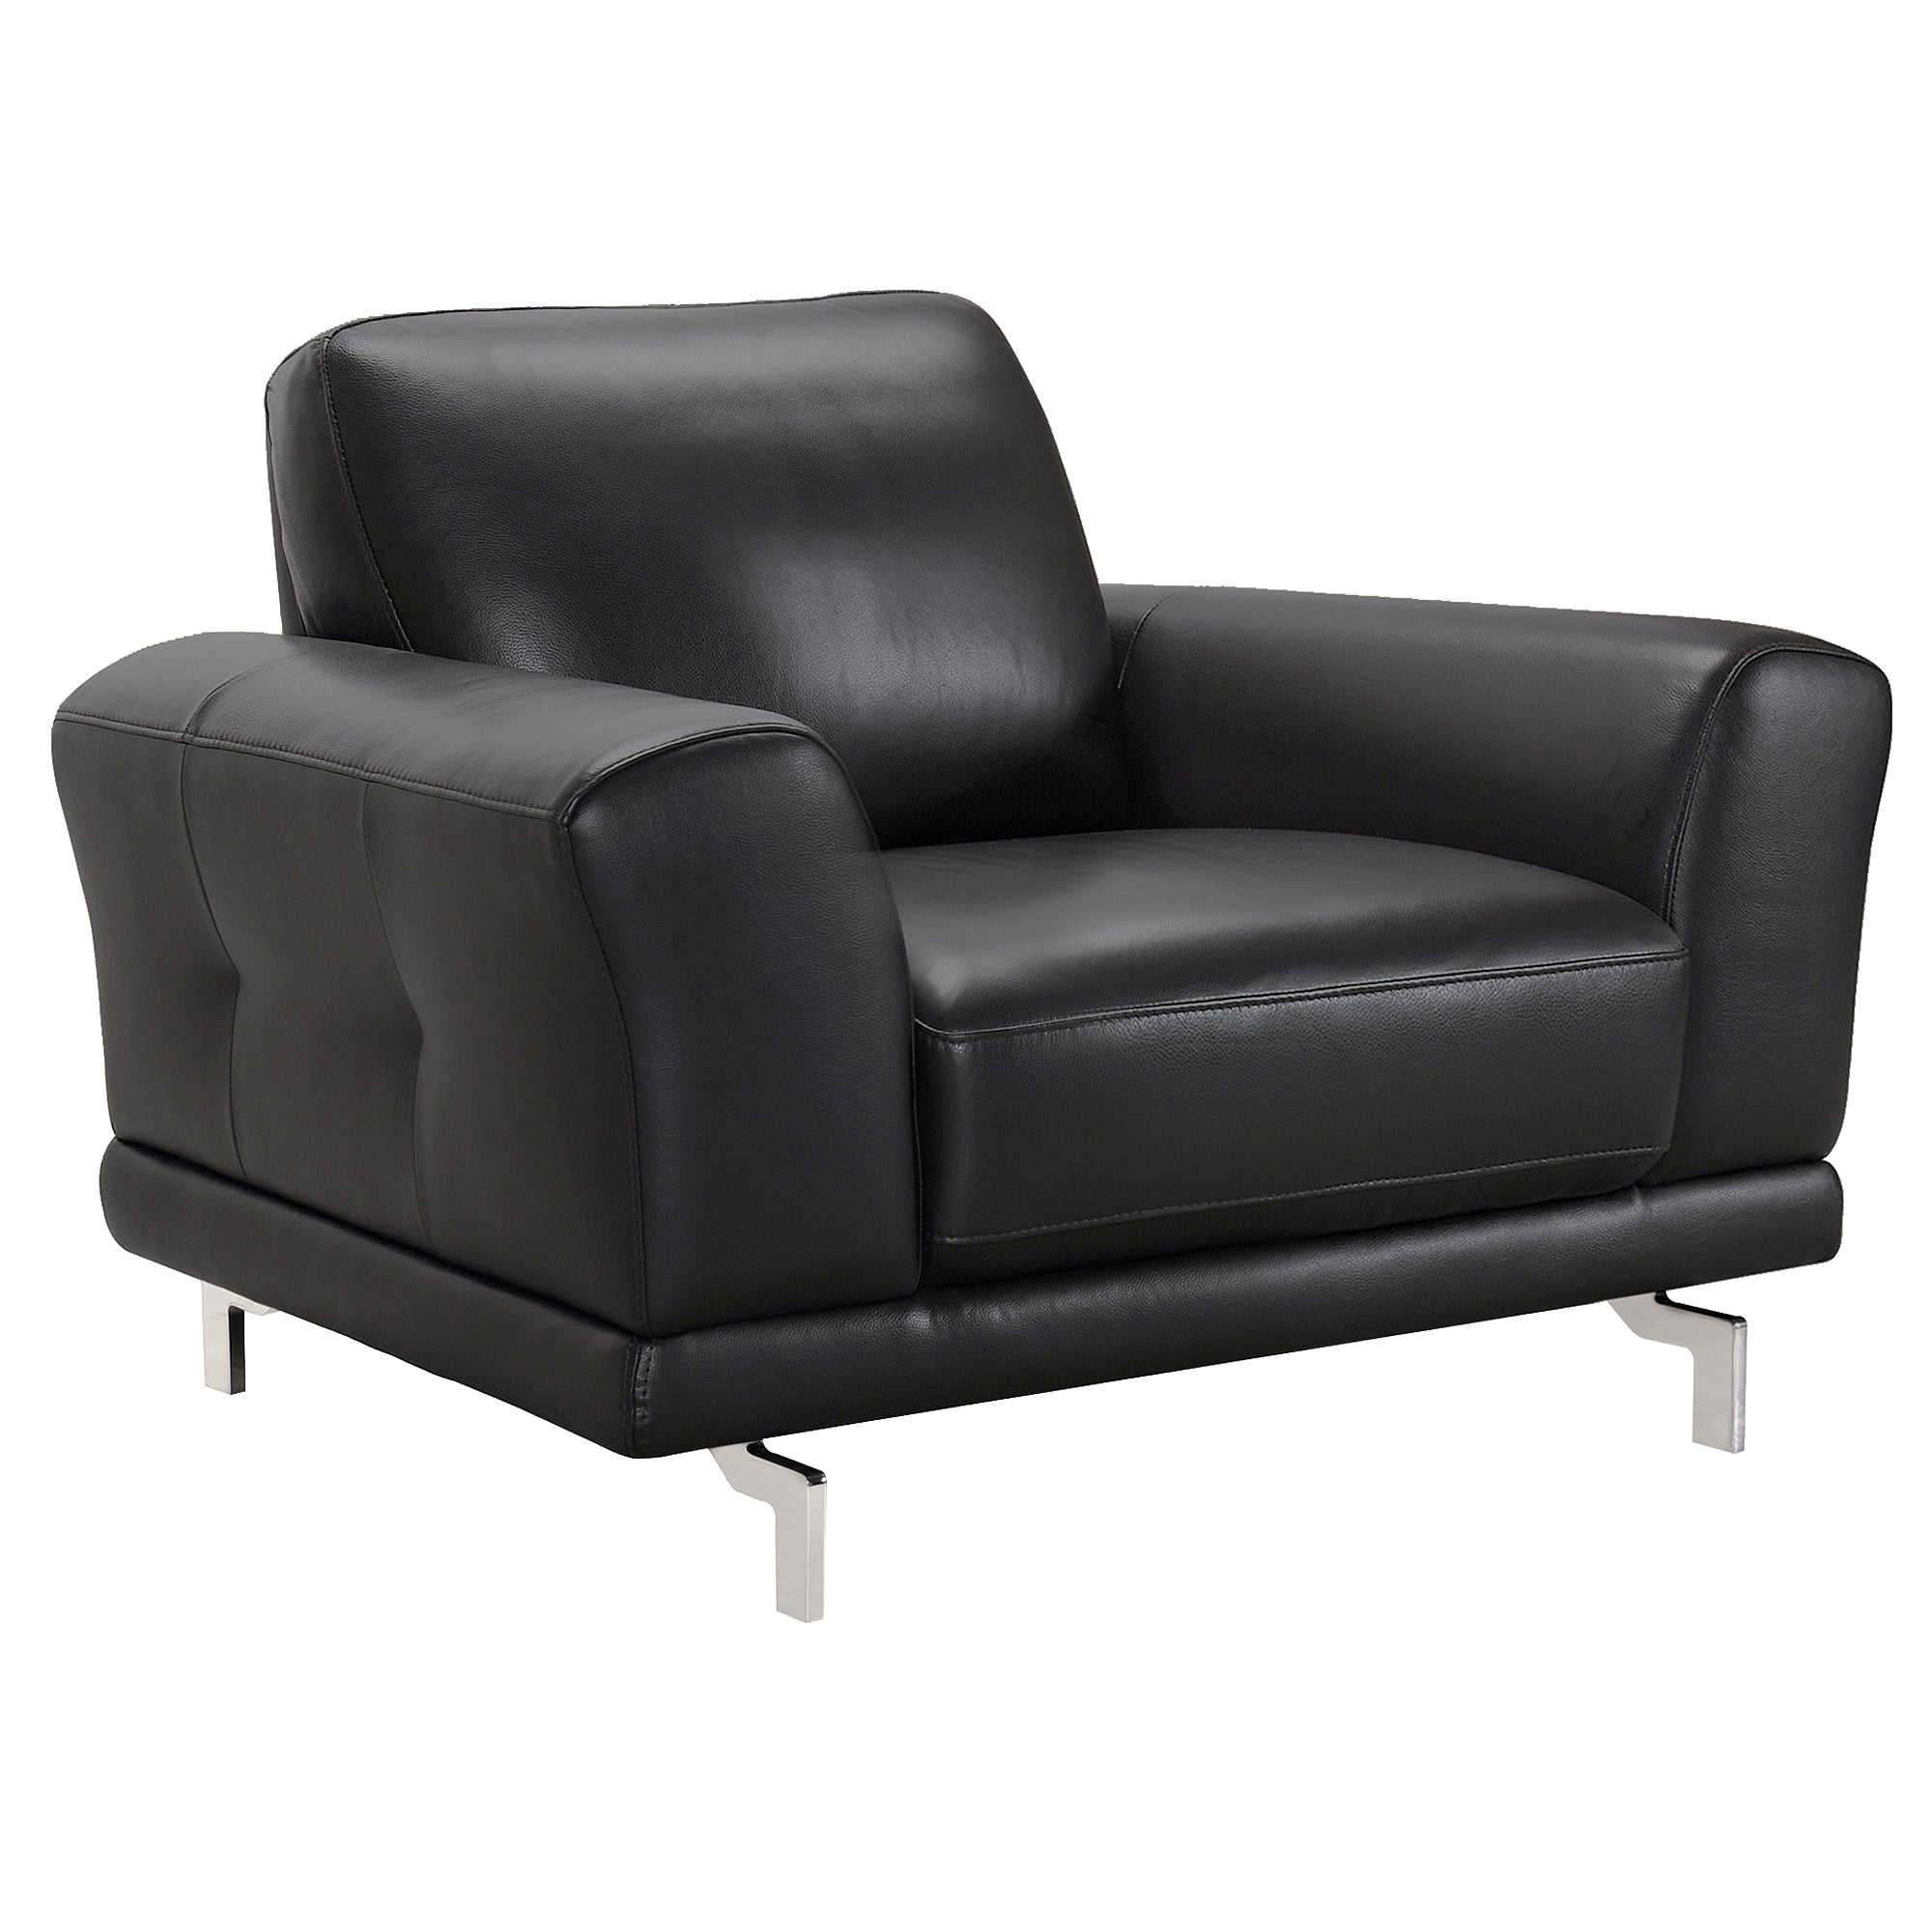 Armen Living Lcev1bl Everly Contemporary Chair In Genuine Black Leather With Brushed Stainless Steel Legs